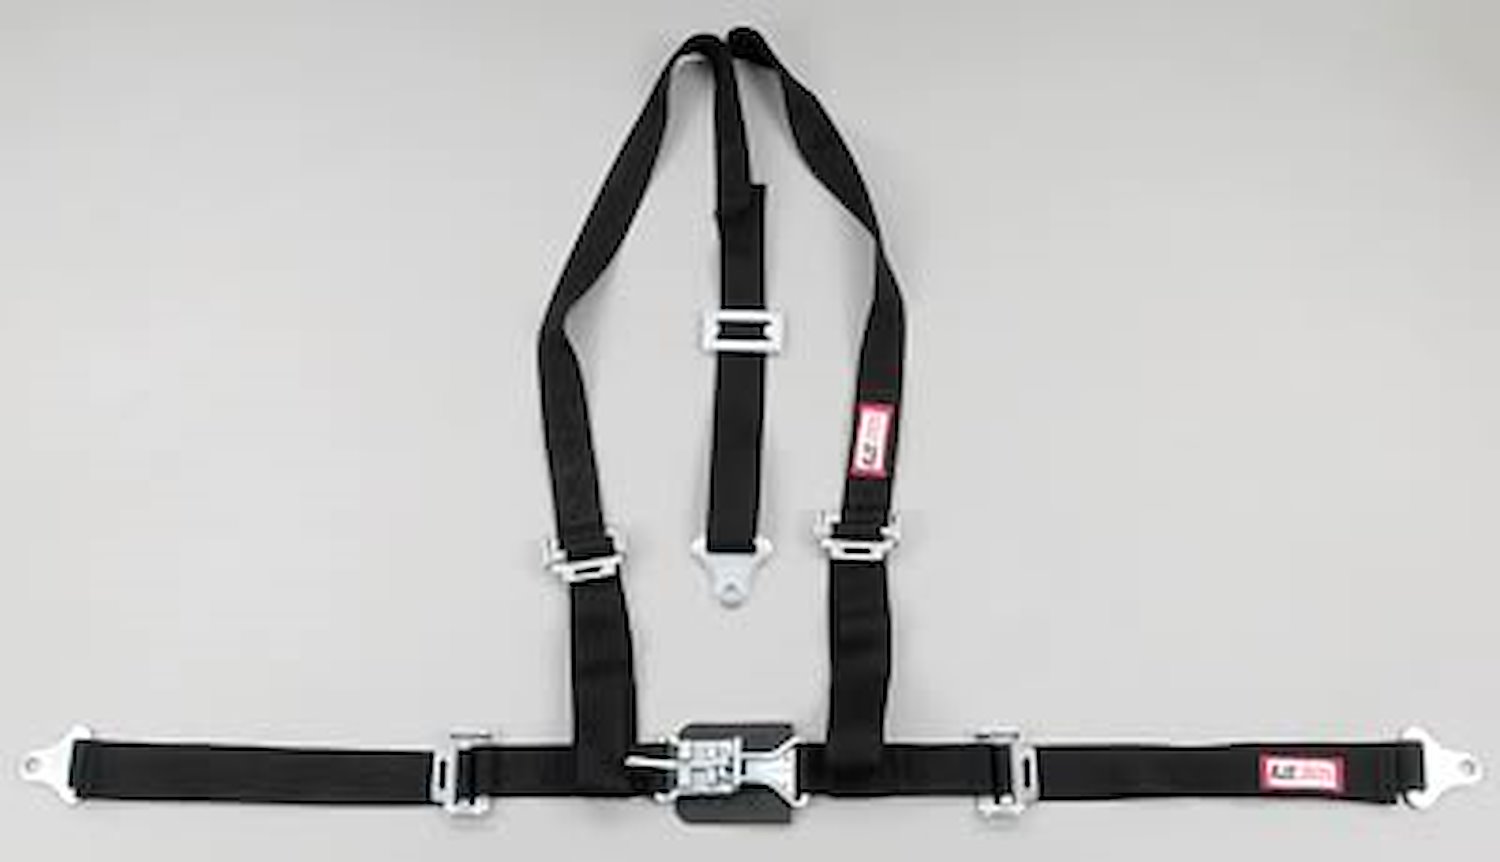 NON-SFI L&L HARNESS 2 PULL DOWN Lap Belt SNAP SEWN IN 2 S.H. Y FLOOR Mount w/STERNUM STRAP WRAP/BOLT HOT PINK